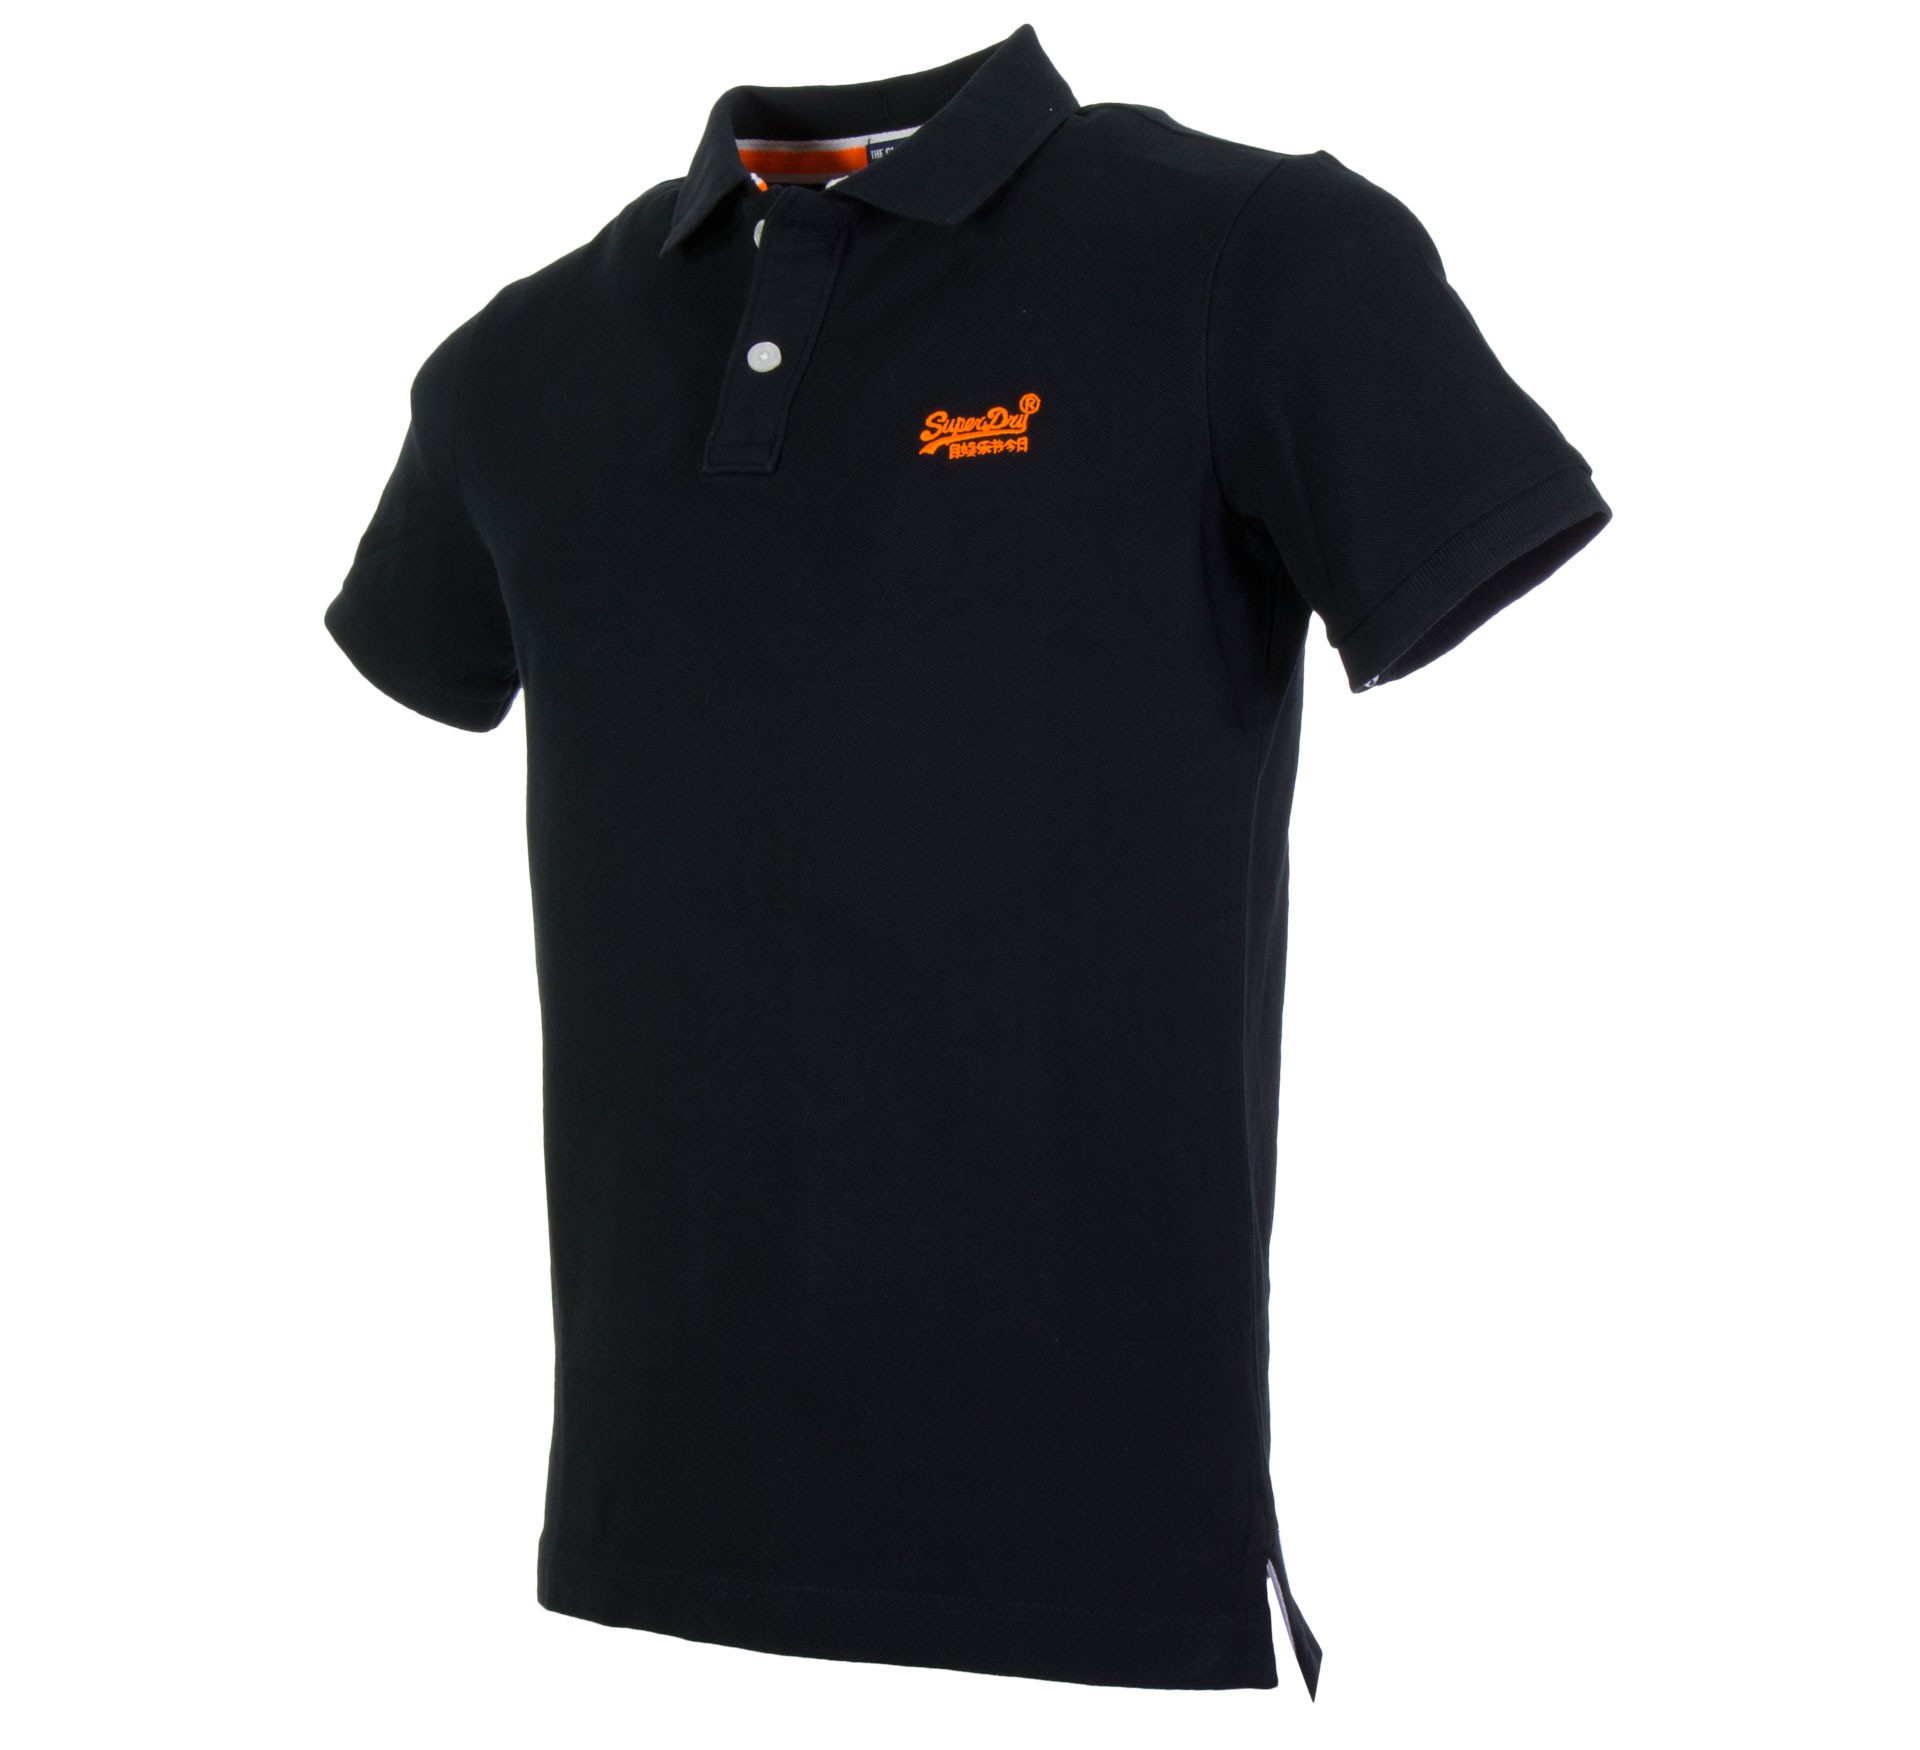 Plutosport - Superdry Classic New Fit Pique Polo